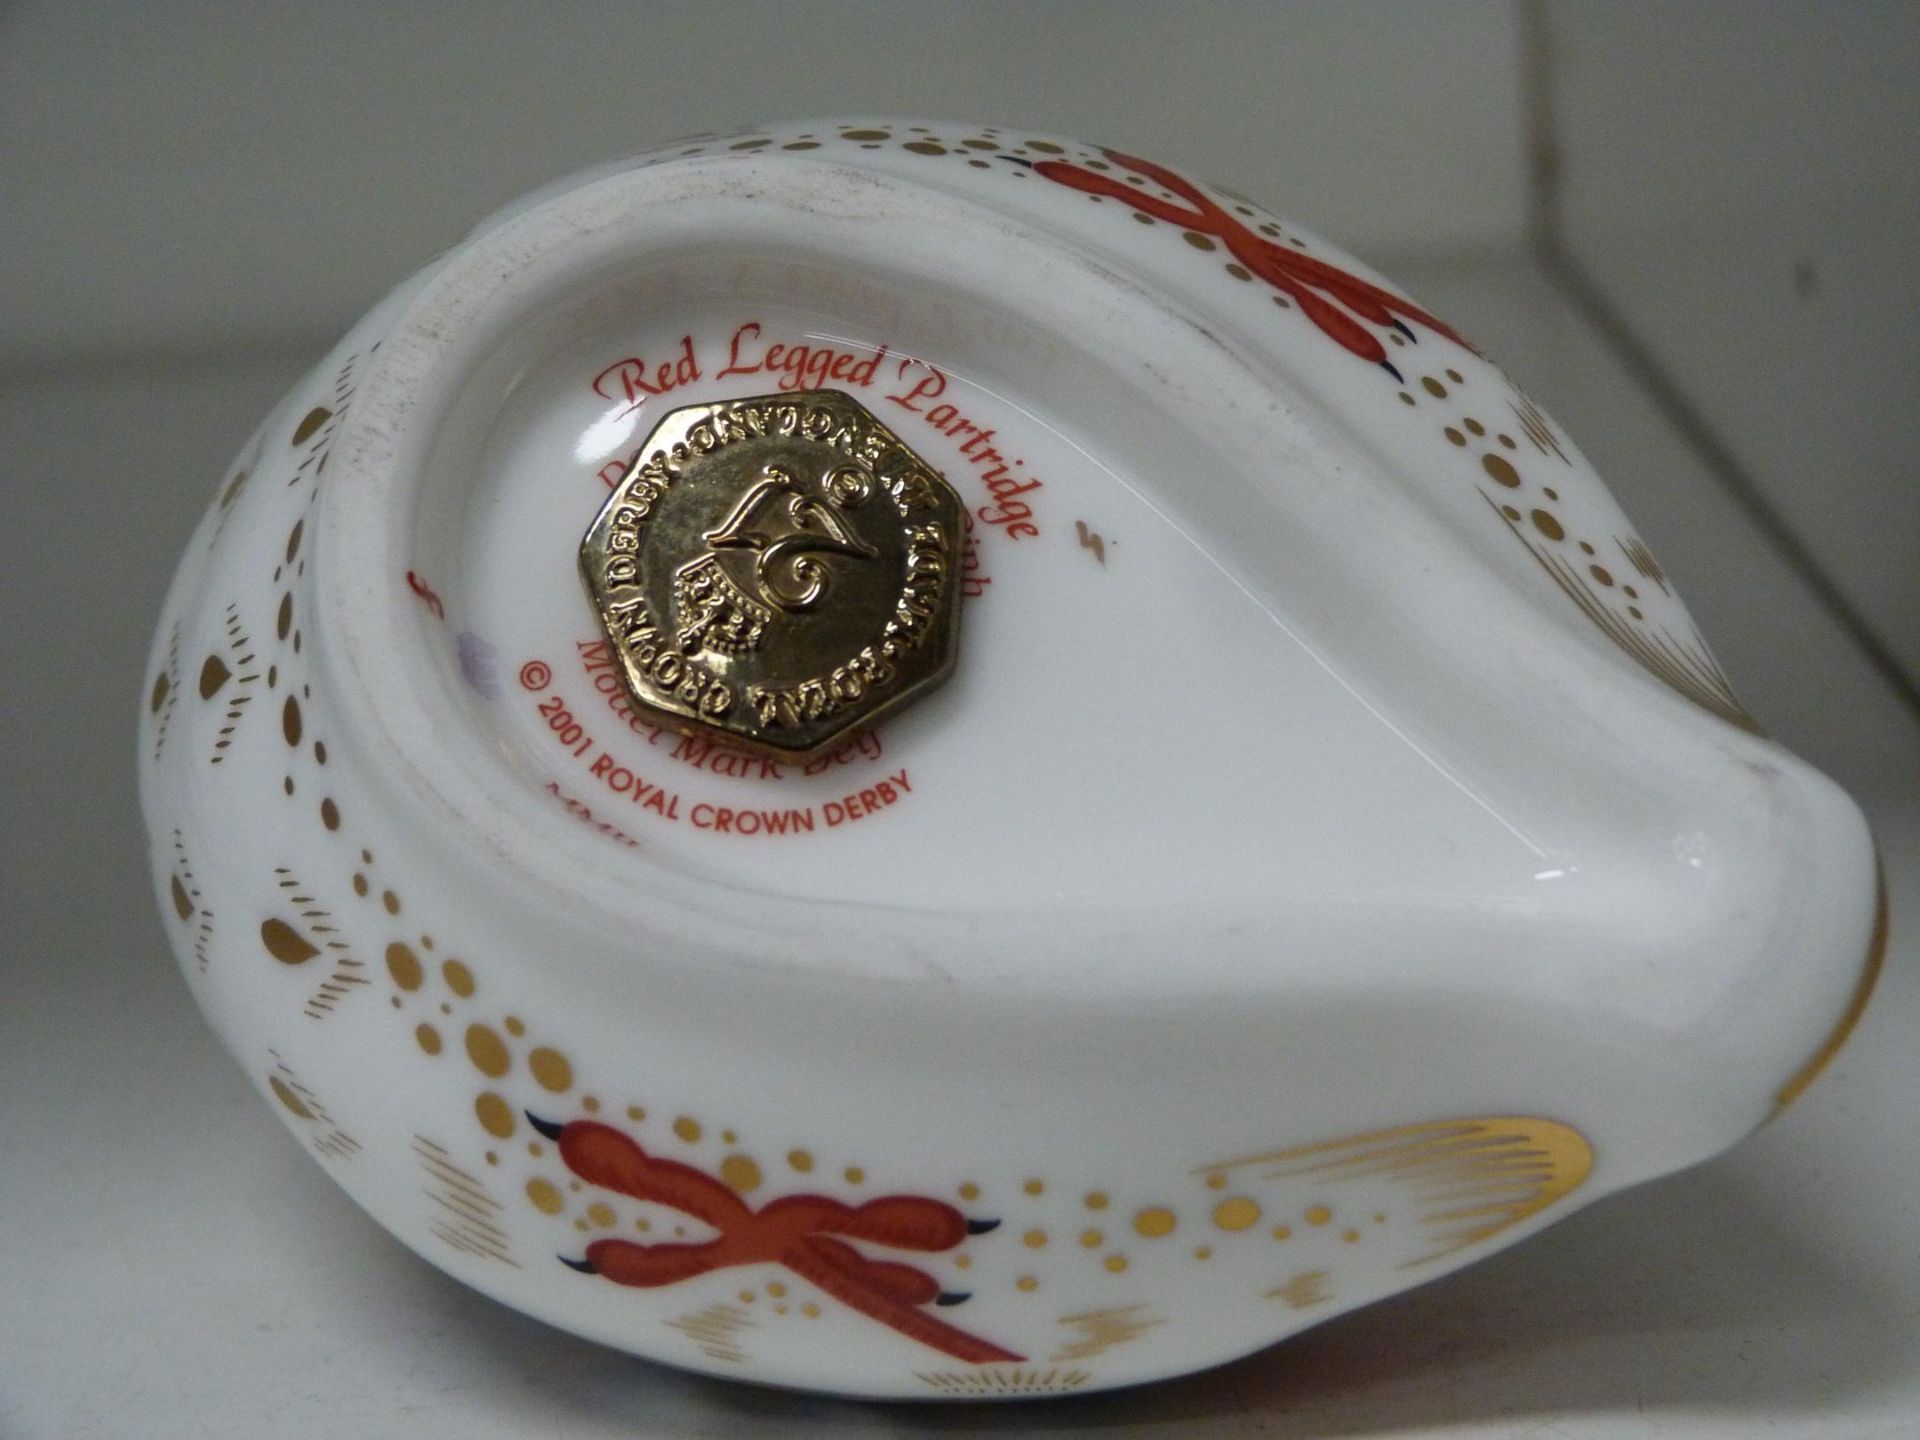 Royal Crown Derby Paperweight - Red Legged Partridge (8-9cm tall) with stopper (est. £20 - £40) - Image 2 of 2